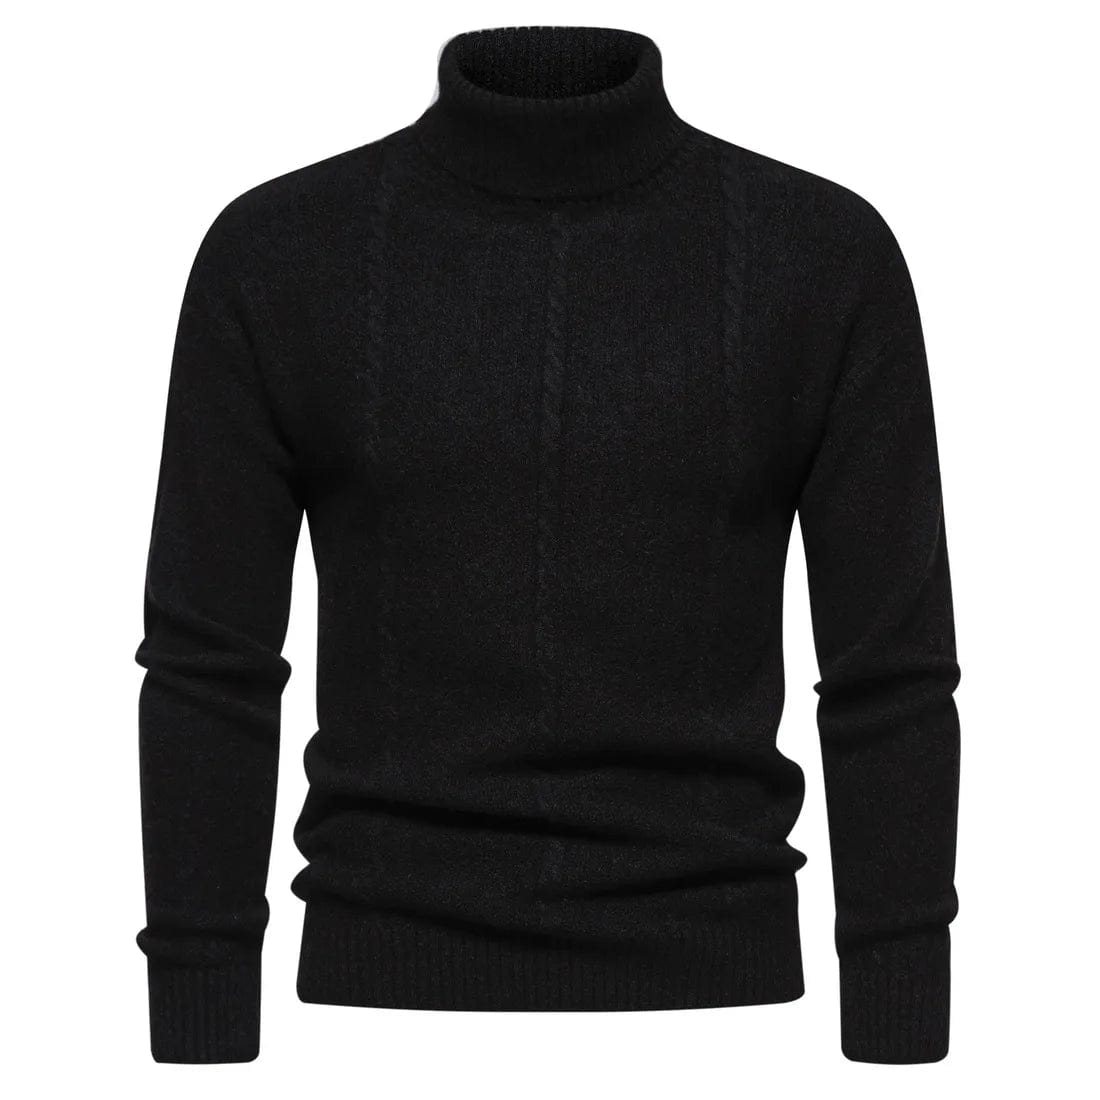 Men's Casual Business Sweater Slim Fit Kintwear Jumpers Turtleneck Knitted Pullover Tops Solid Color